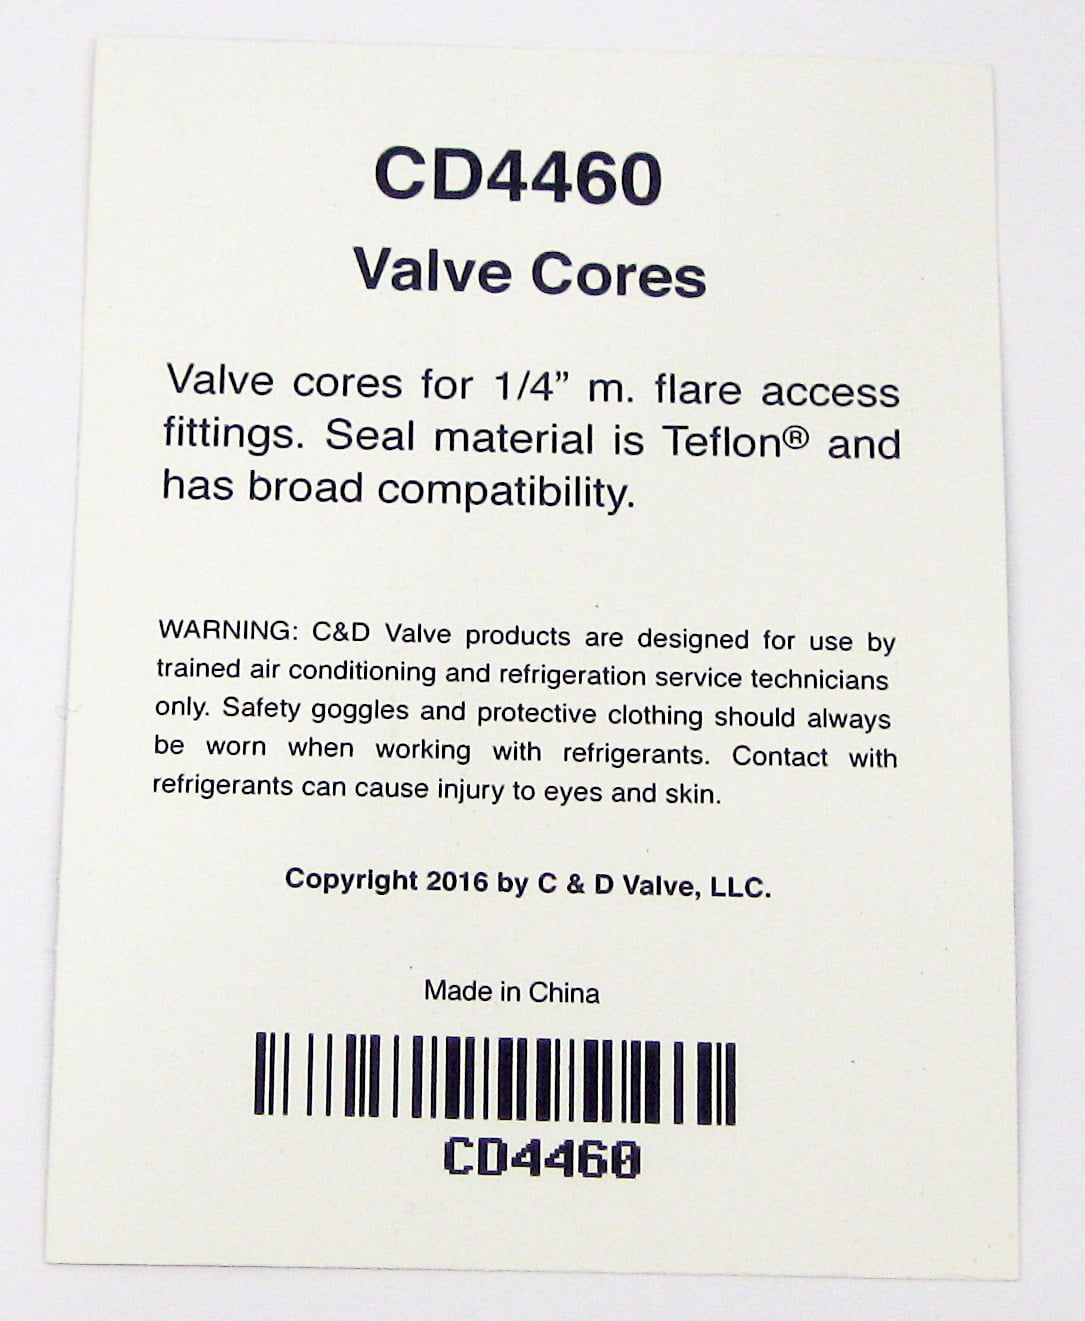 6 VALVE CORES CD4460 COMPATABLE WITH ALL REFRIGERANTS 